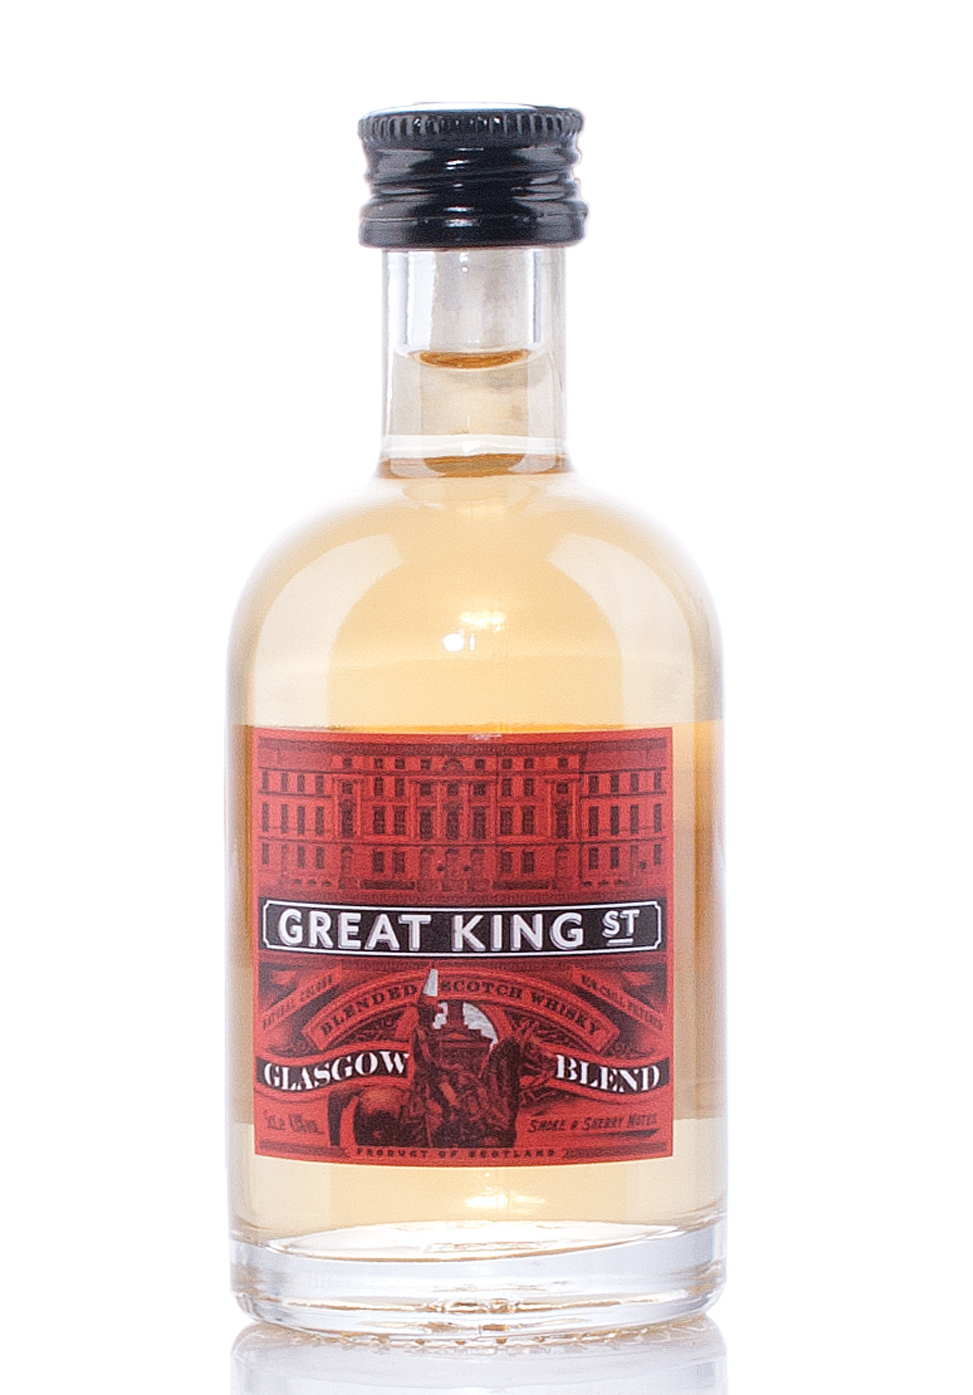 Whisky Great King Street by Compass Box, Glasgow Blend (0.7L) Image